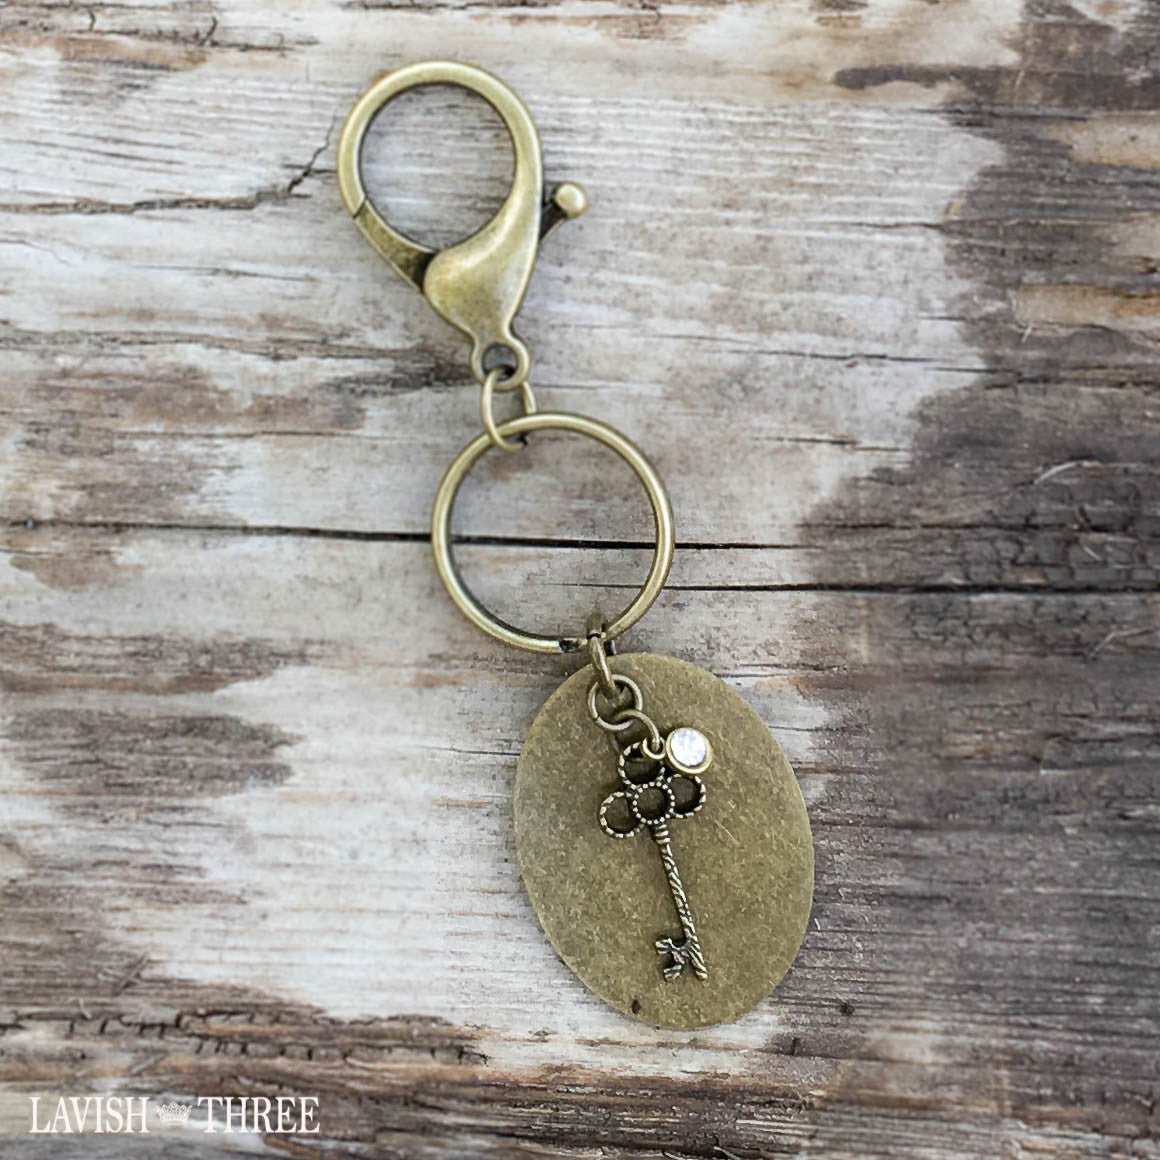 Welcome Home key-ring chain in antique brass finish with purse